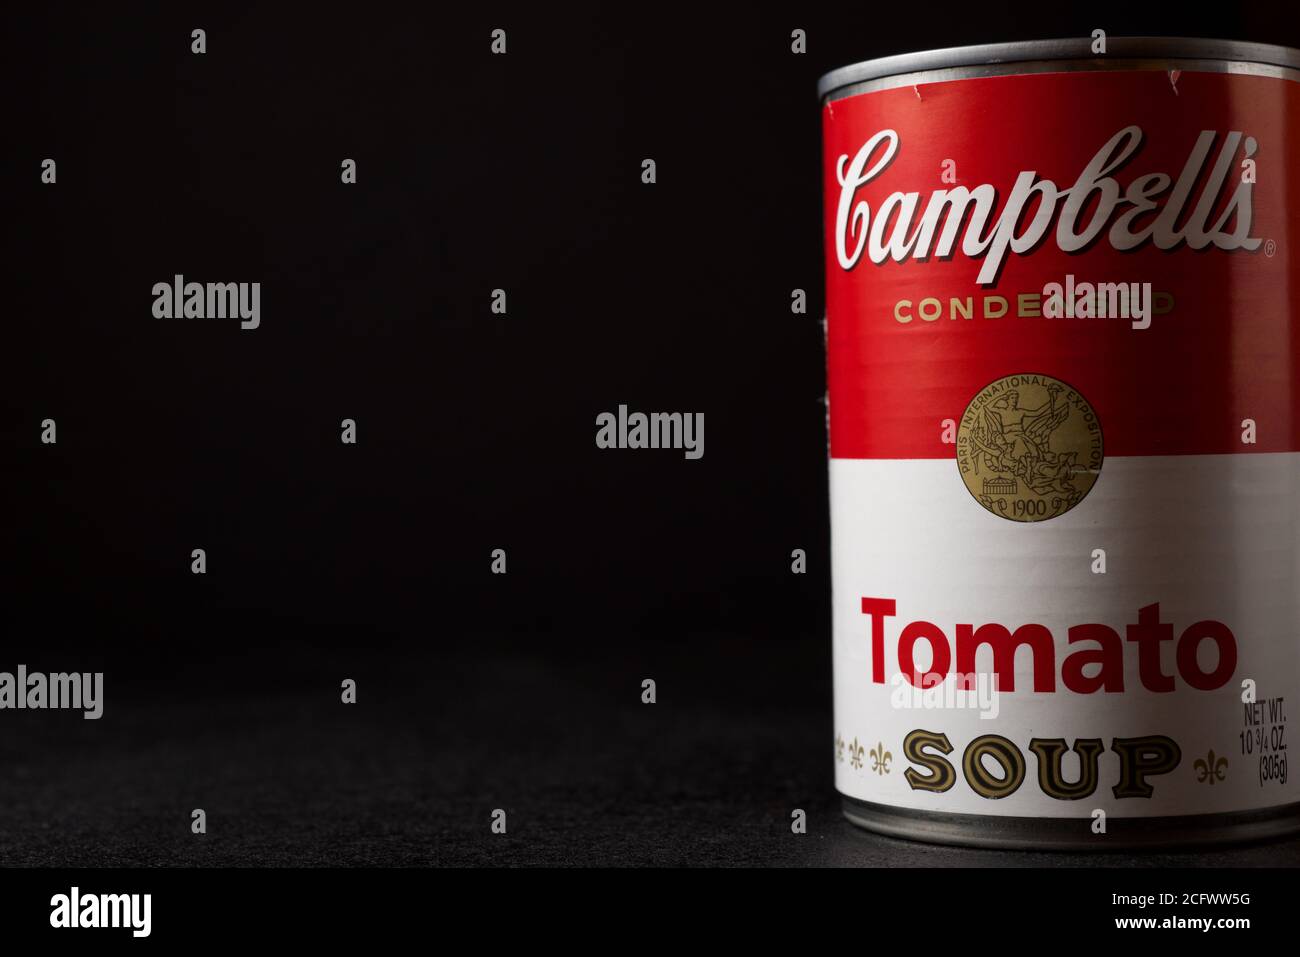 Zaragoza, Spain - March 4, 2020: Close-up of a can of Campbell's condensed soup on a black table. Stock Photo